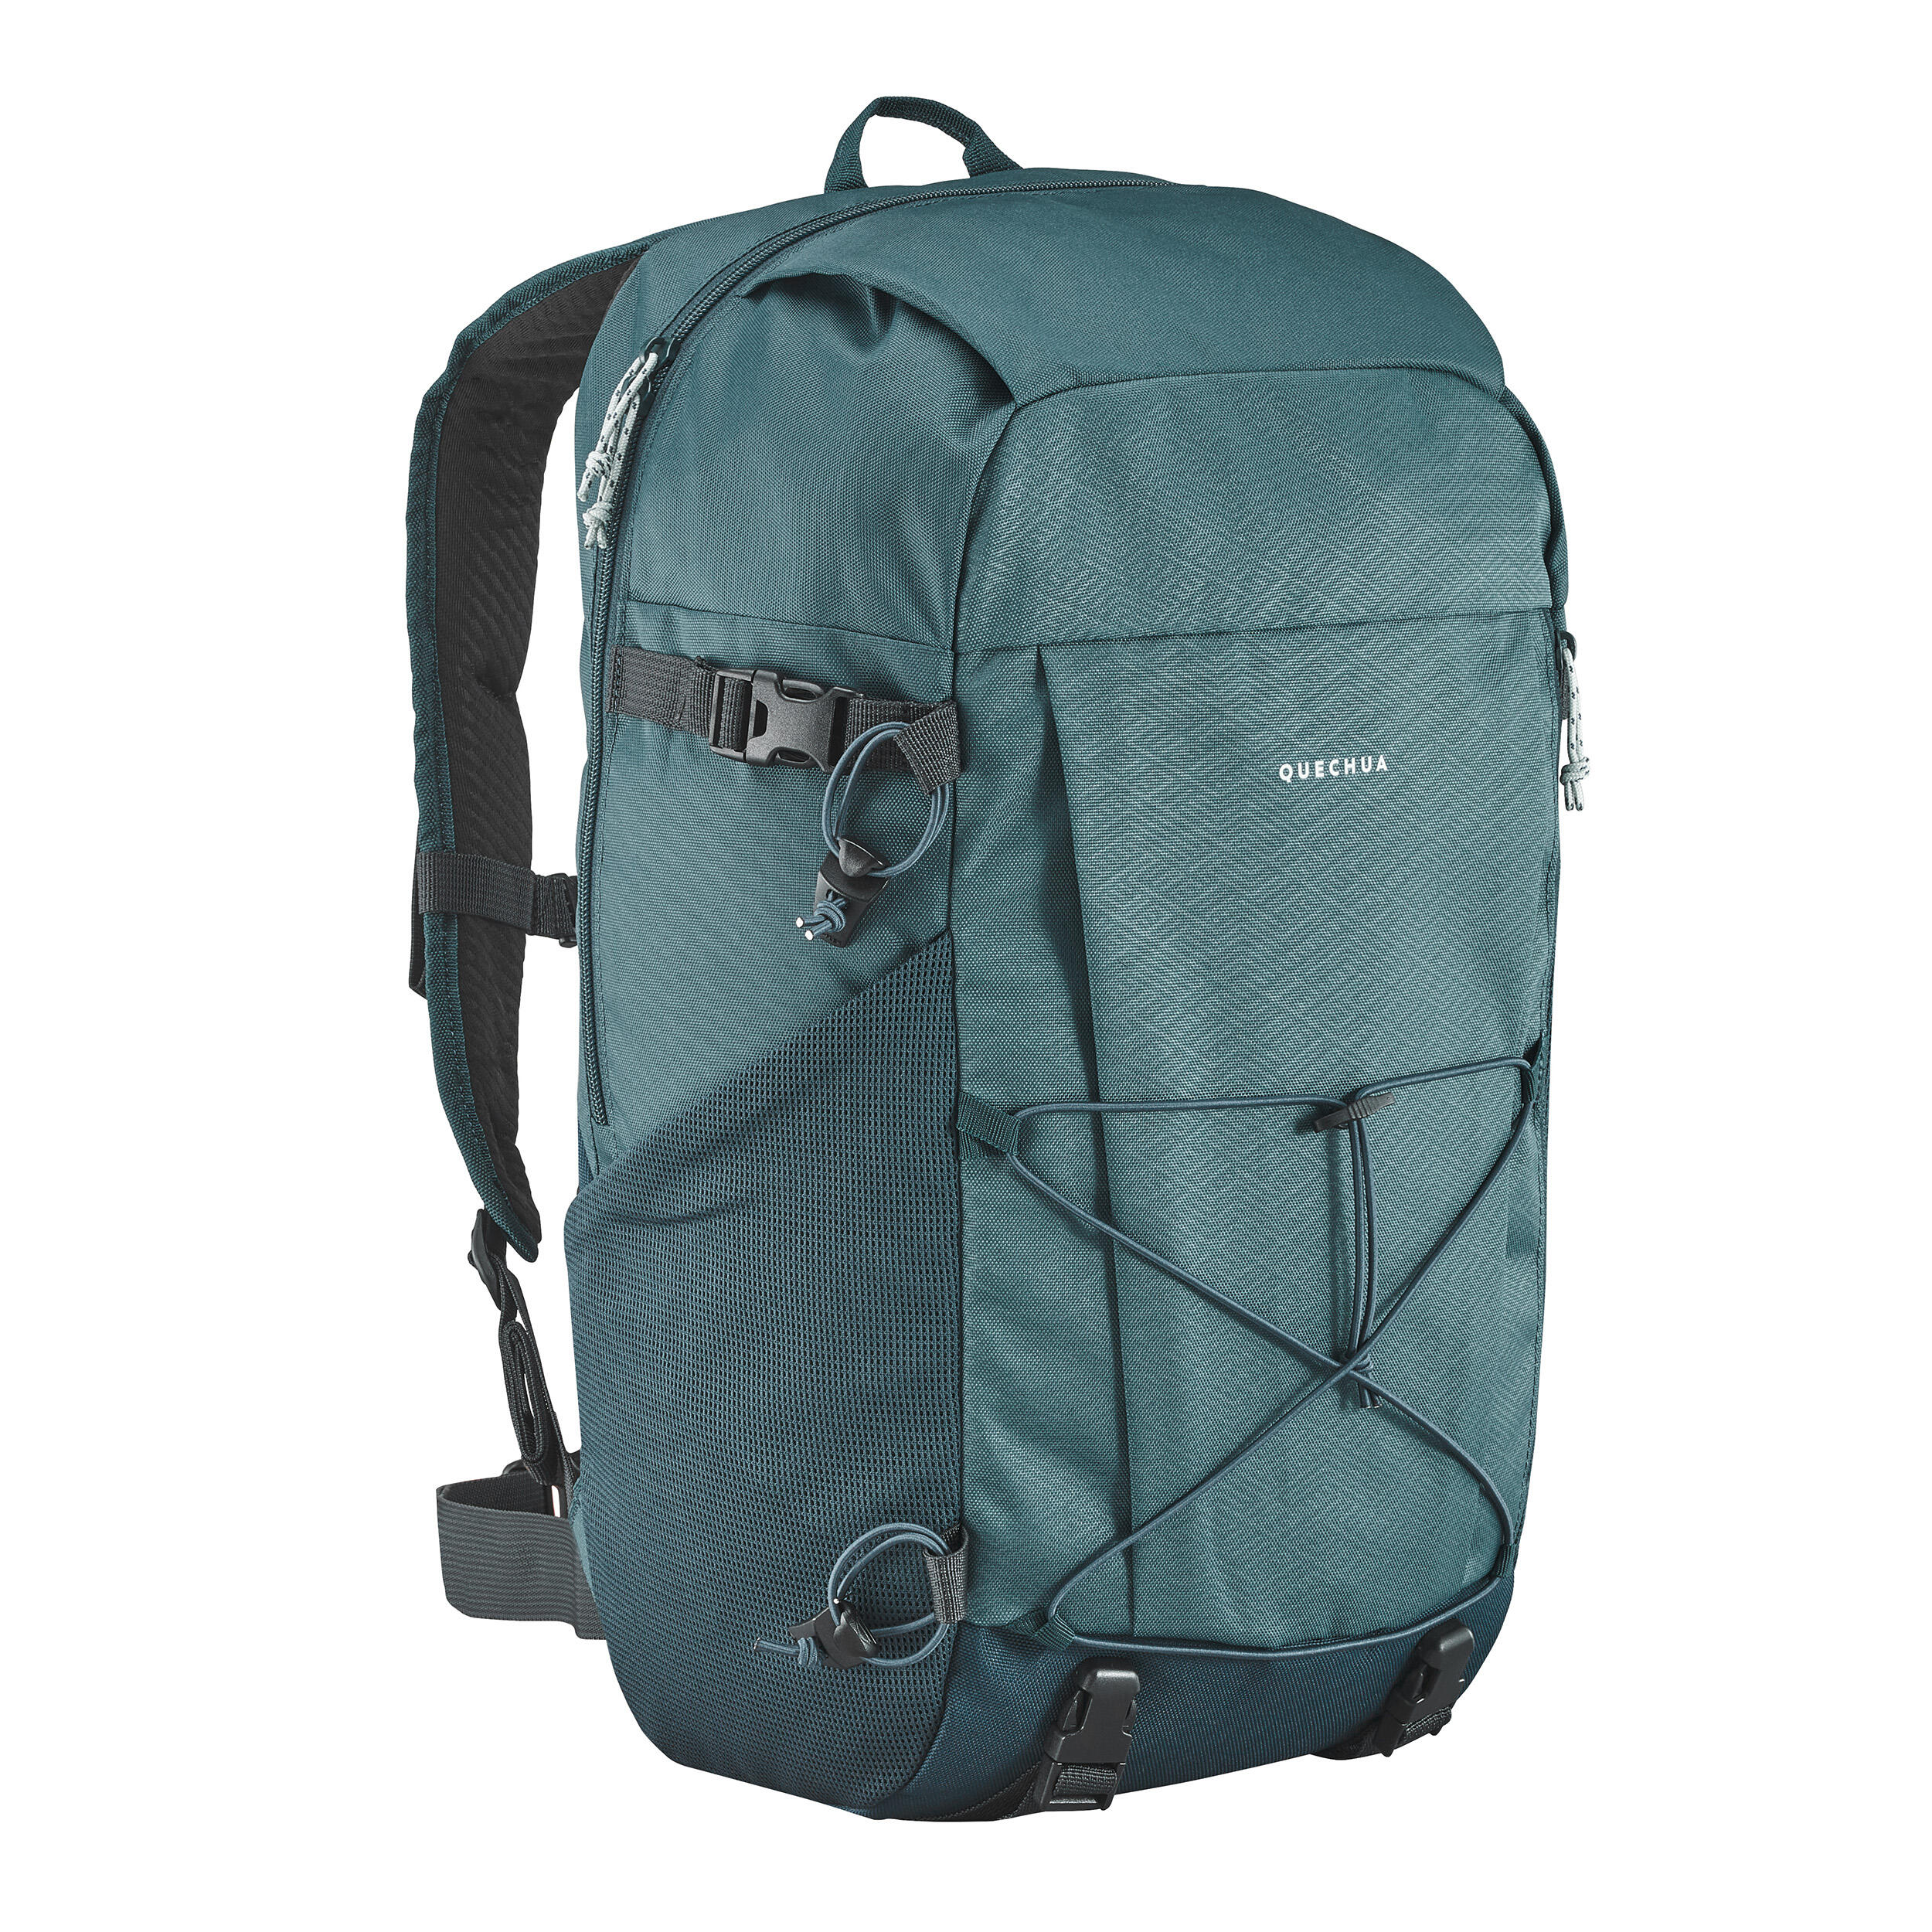 Quechua back pack 30L, Men's Fashion, Bags, Backpacks on Carousell